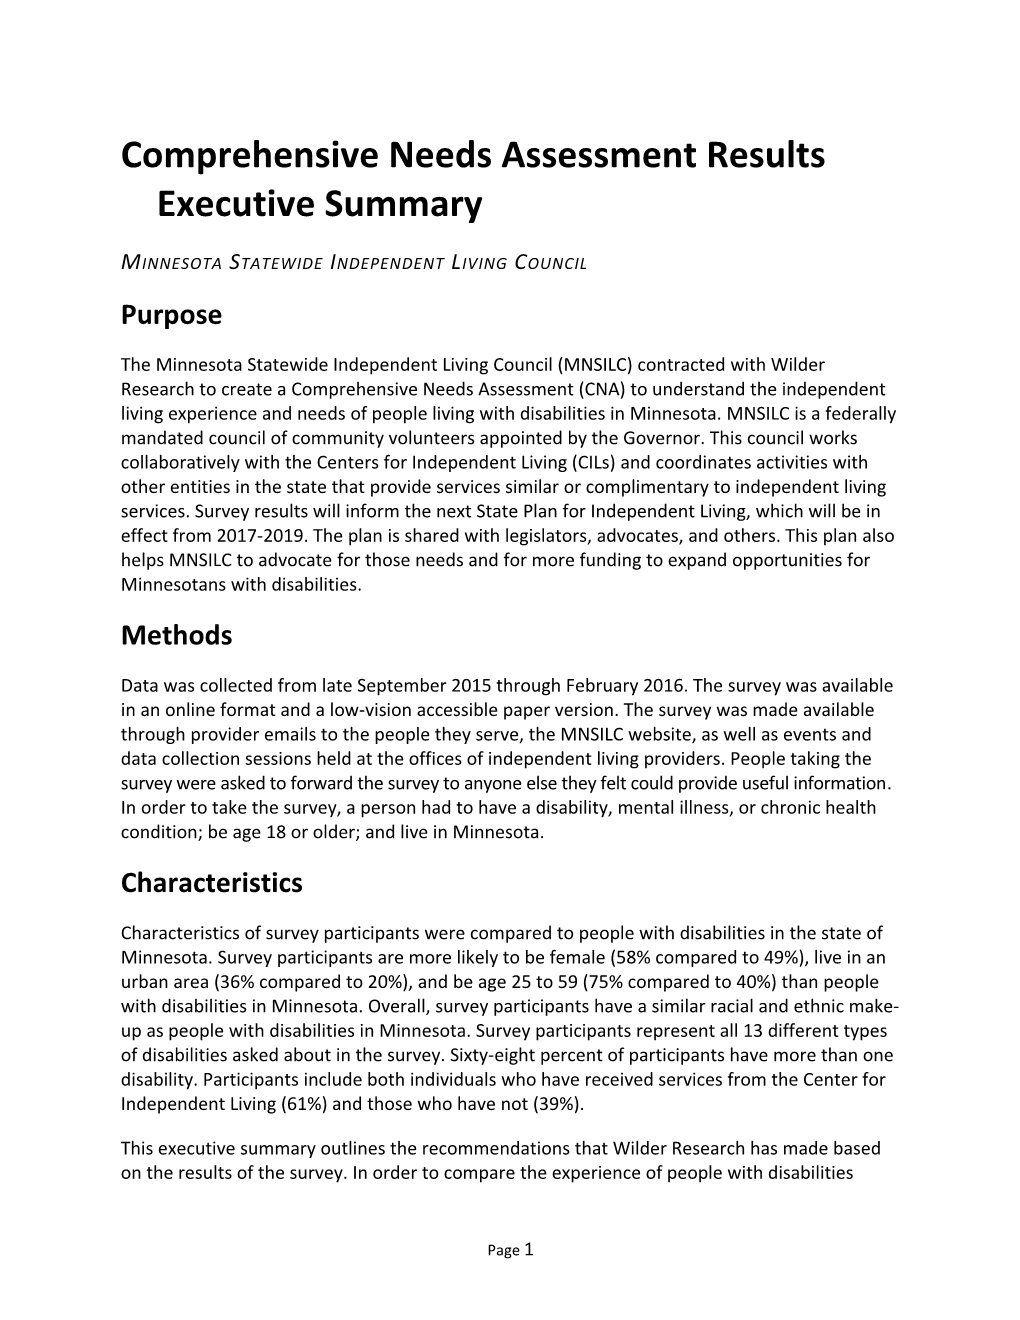 Comprehensive Needs Assessment Results Executive Summary